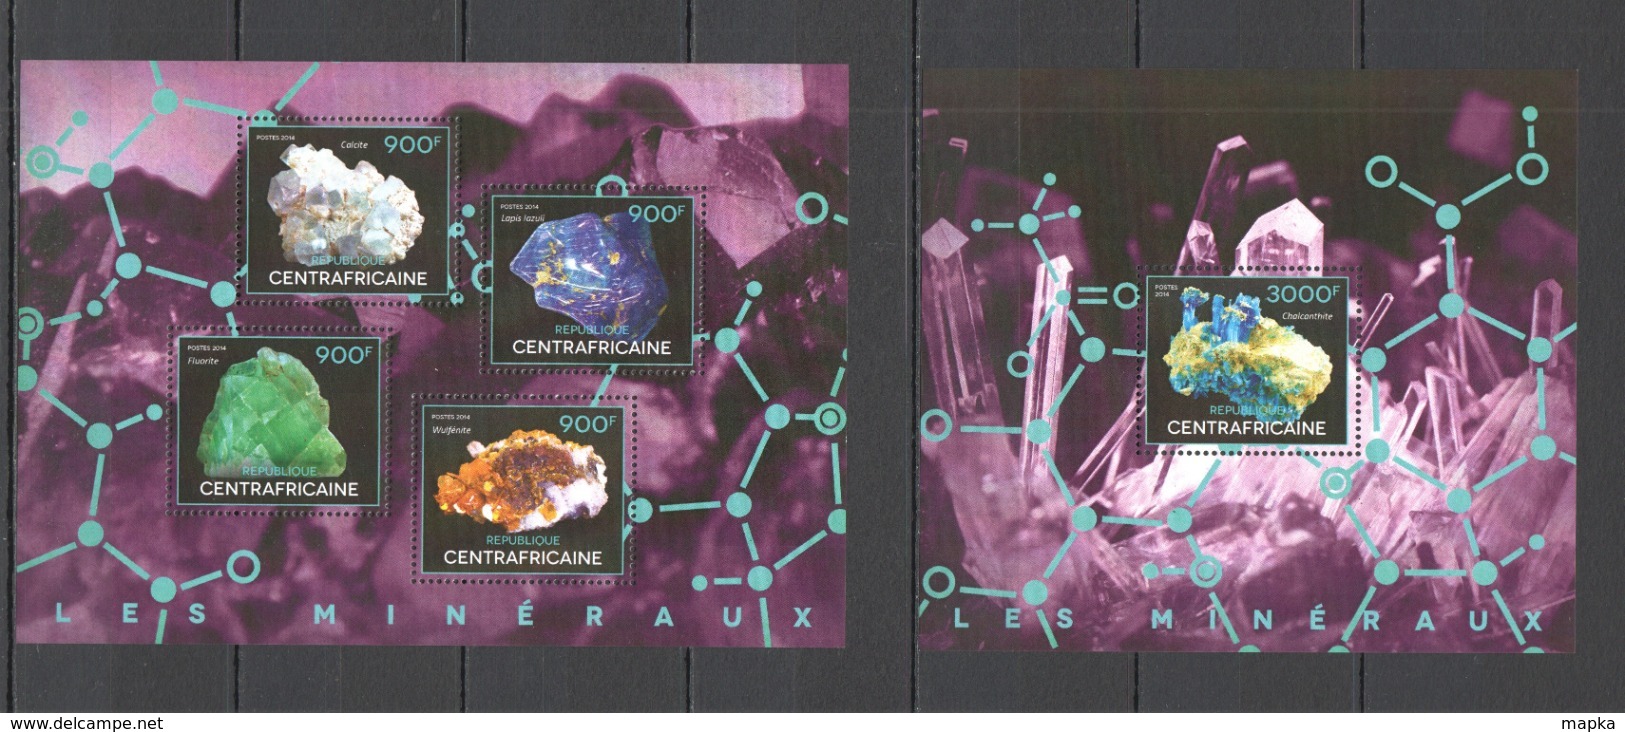 CA417 2014 CENTRAL AFRICA CENTRAFRICAINE NATURE GEOLOGY MINERALS LES MINERAUX KB+BL MNH - Minerales